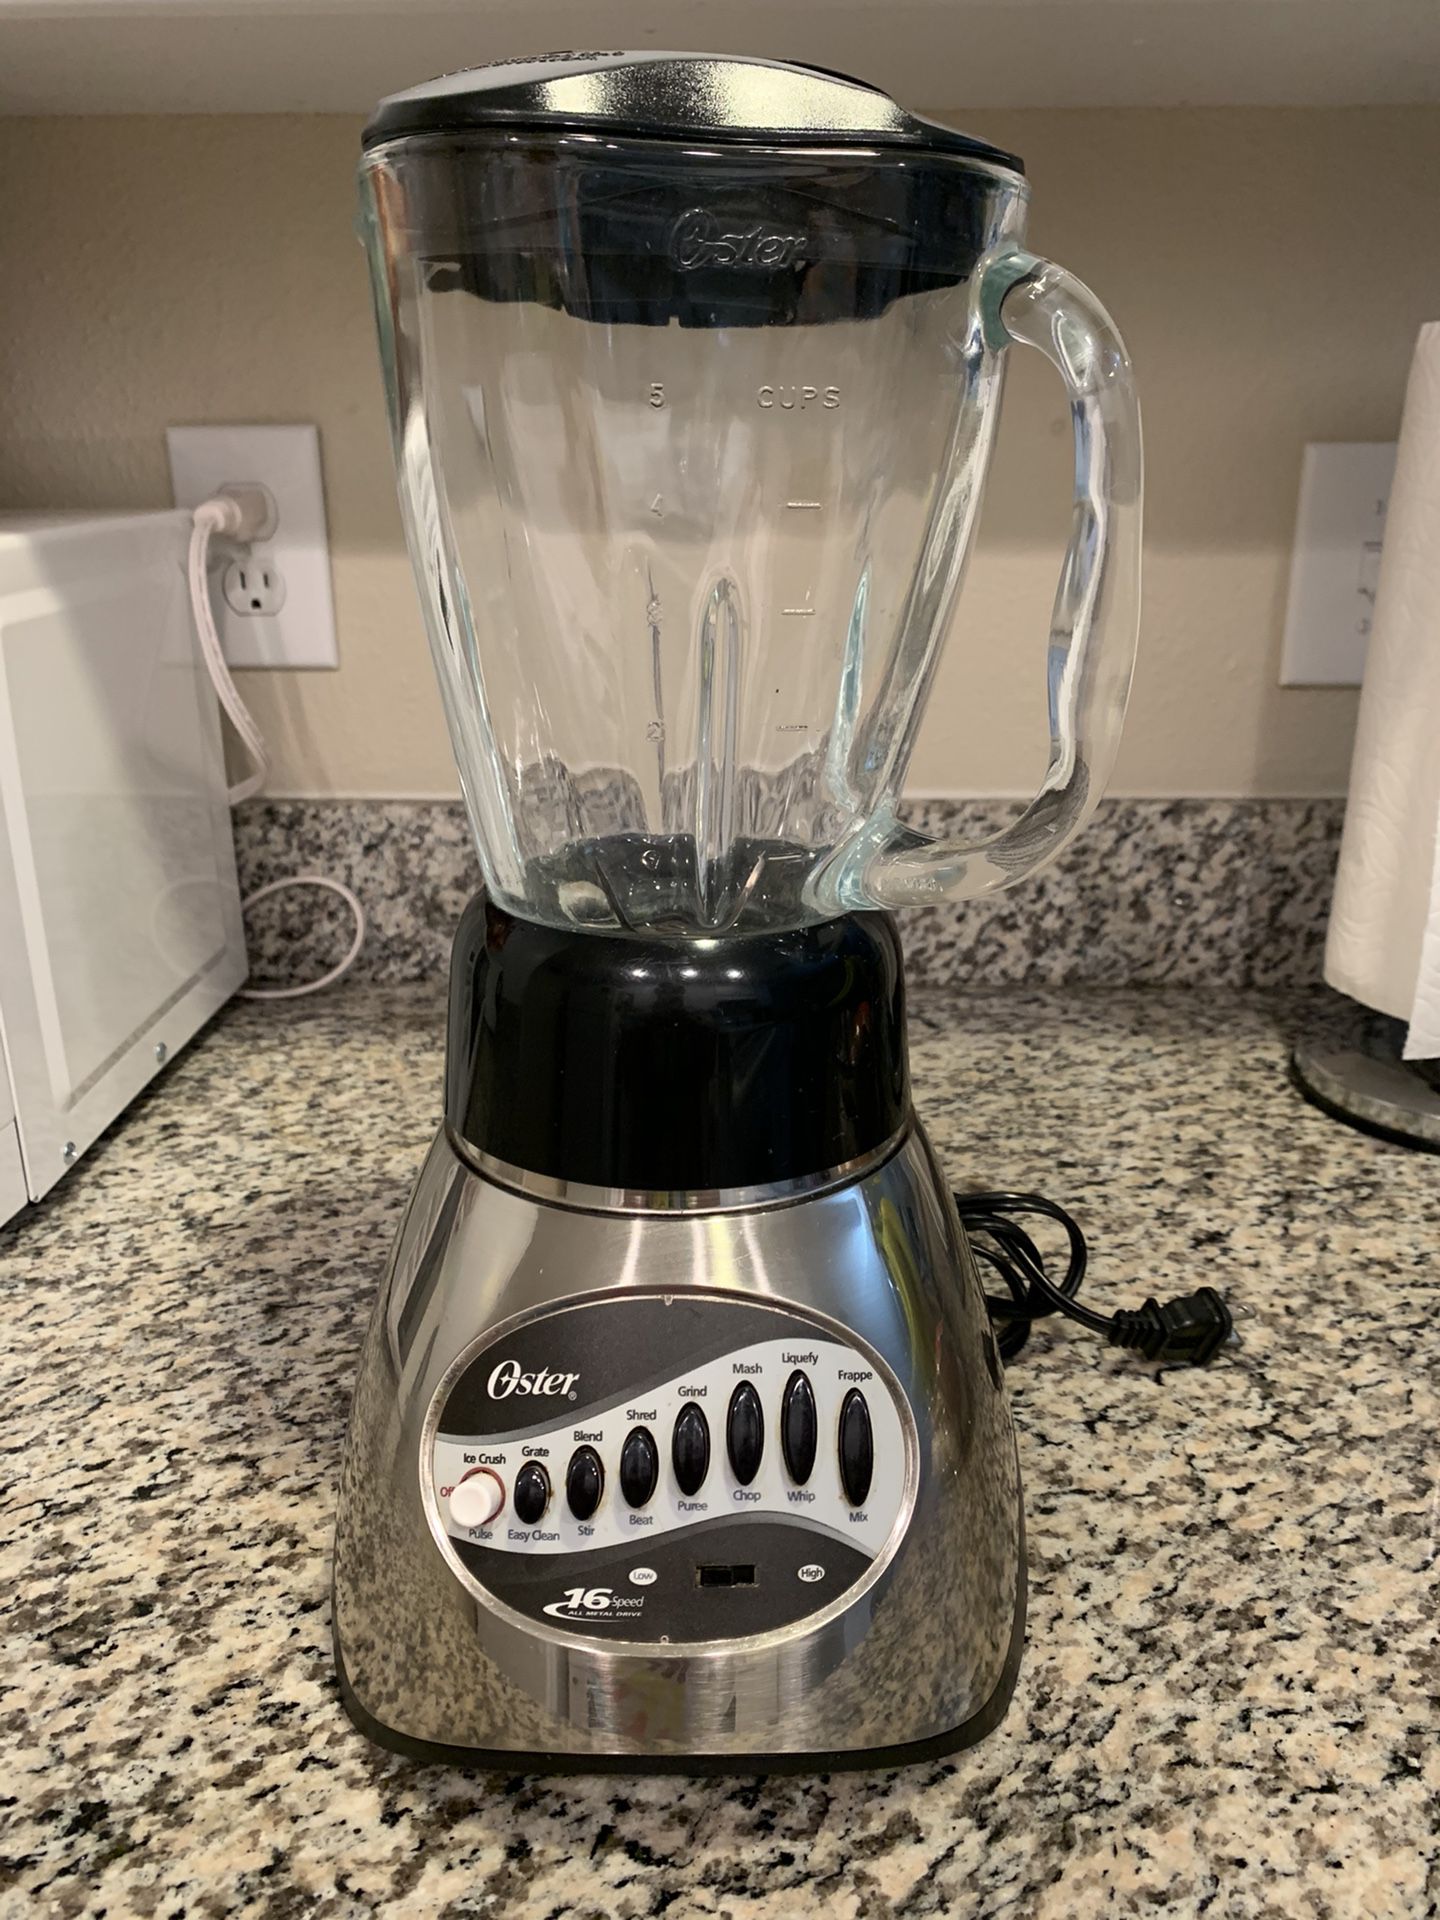 Oster 16 speed all metal drive blender